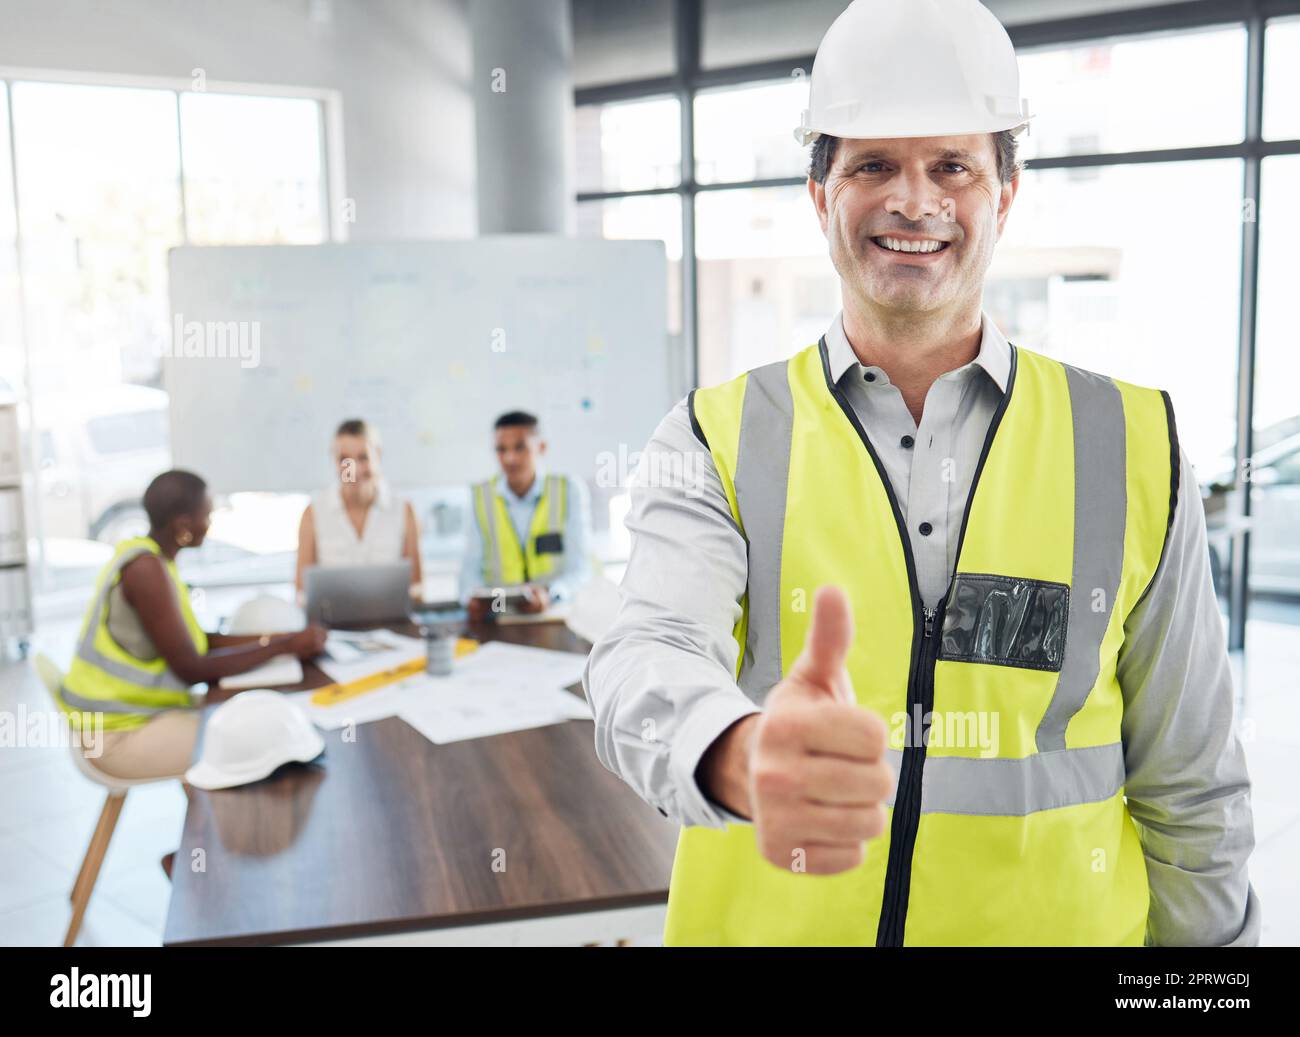 Thumbs up, leader and architect team working on architecture design for a home, house or skyscraper building. Senior man, manager or supervisor with thumbsup for motivation, teamwork or collaboration Stock Photo